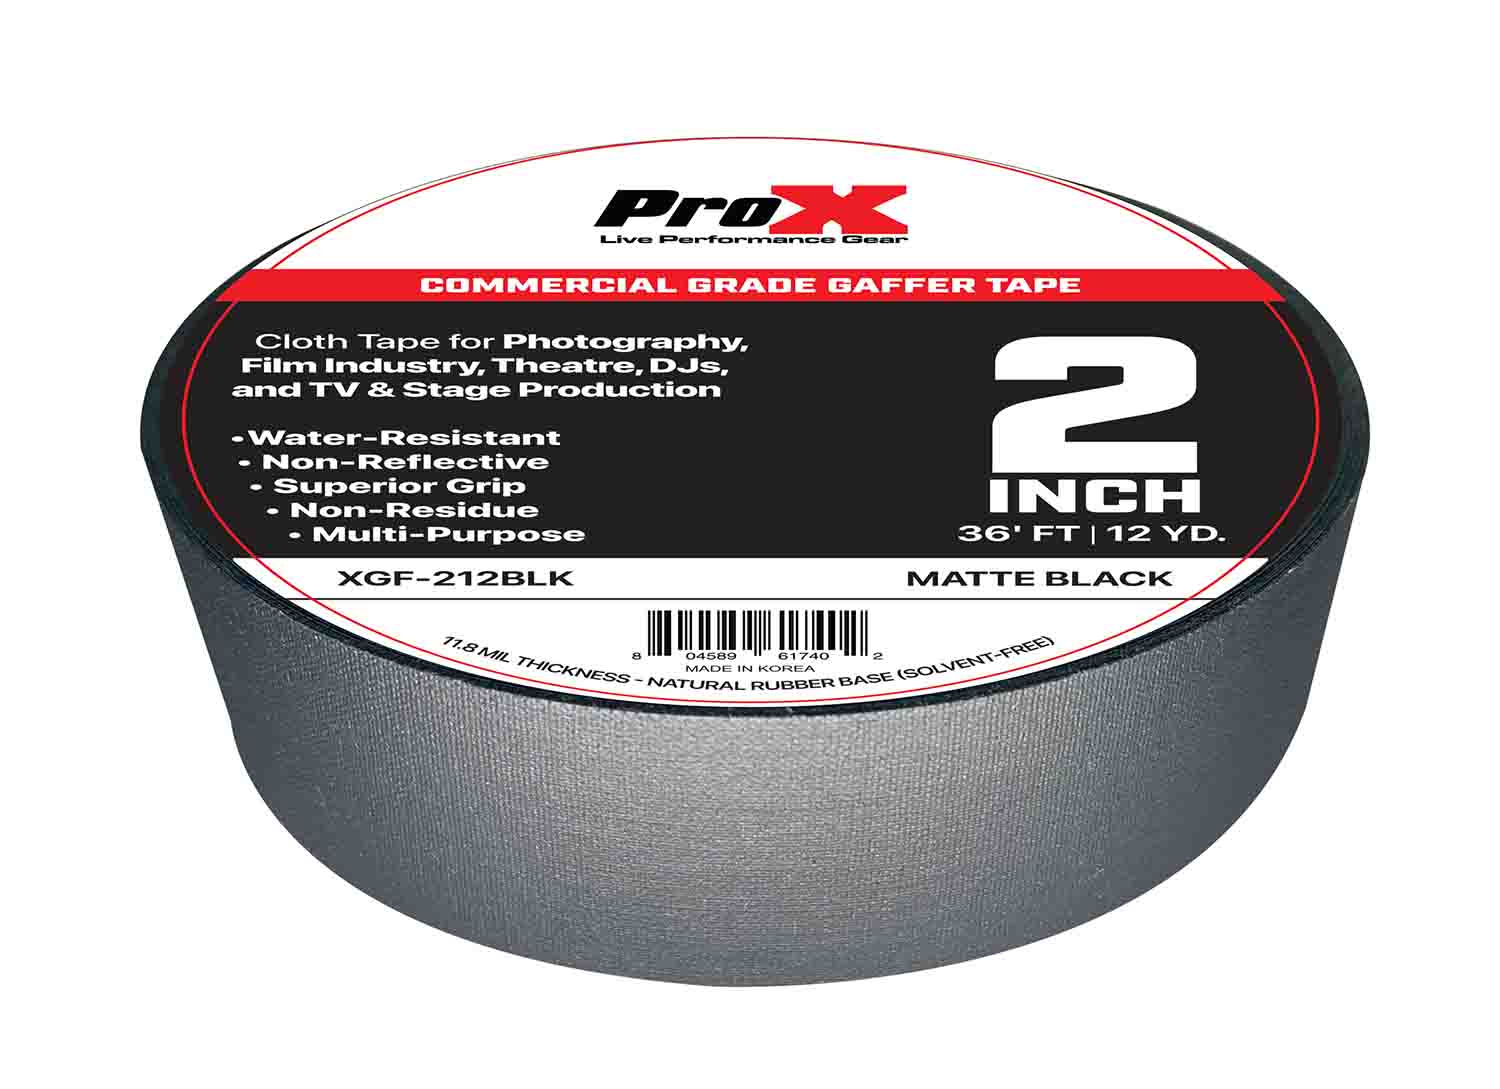 ProX XGF-212BLK, 2 Inch 12YD Matte Black Commercial Grade Gaffer Tape Pros Choice Non-Residue - 36FT - Hollywood DJ